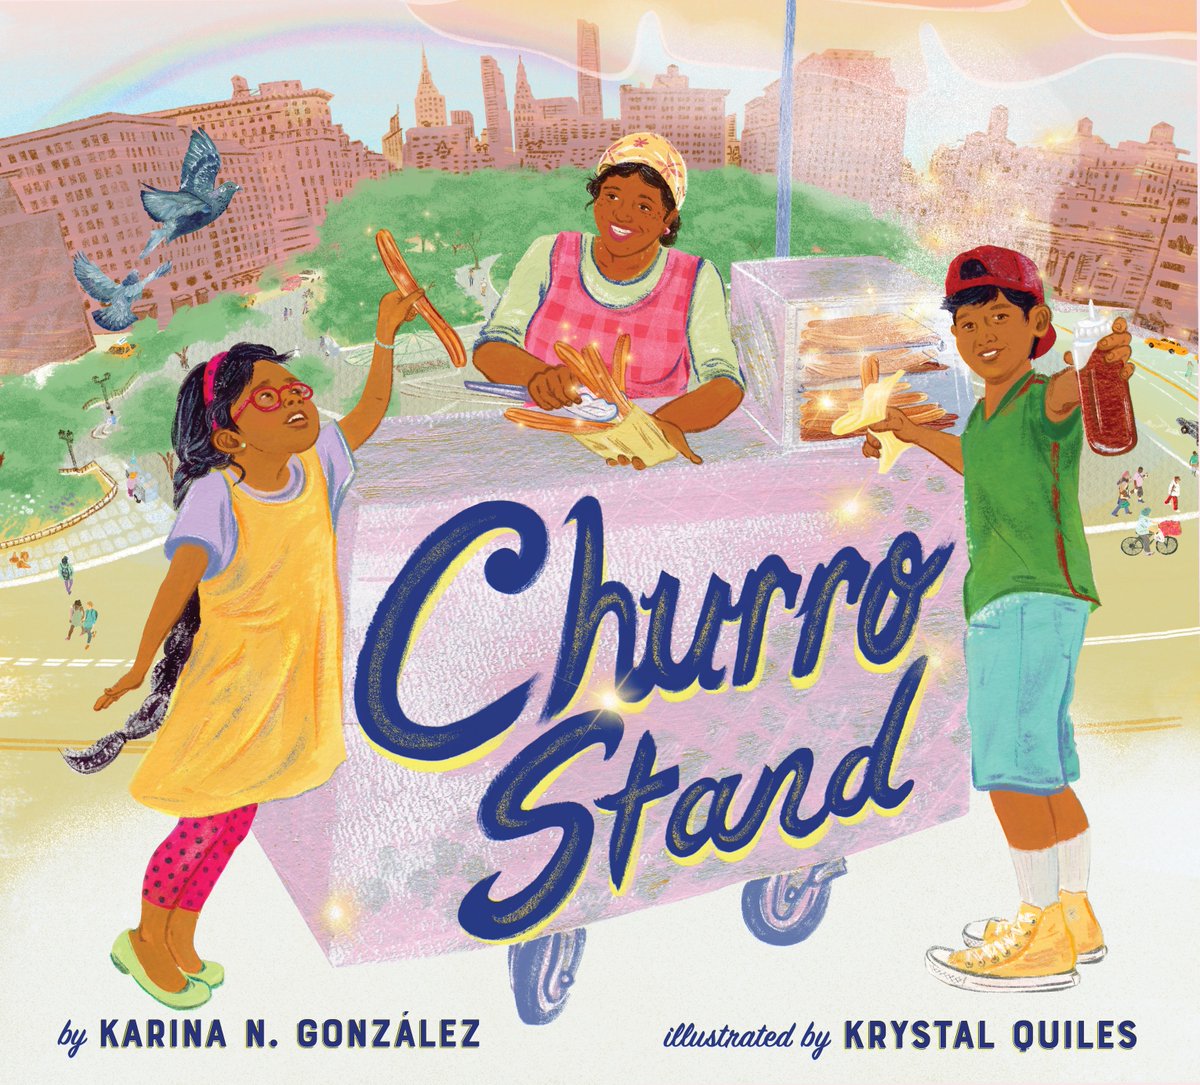 Enjoy the POP, SIZZLE, and CRUNCH of the perfect churro with the #ChurroStandBook by @wordsbykarina & Krystal Quiles! This heartwarming picture book is available now in English and Spanish, so pick up your copy today! #BookBirthday bit.ly/4ajTufz bit.ly/42Jn0Zi